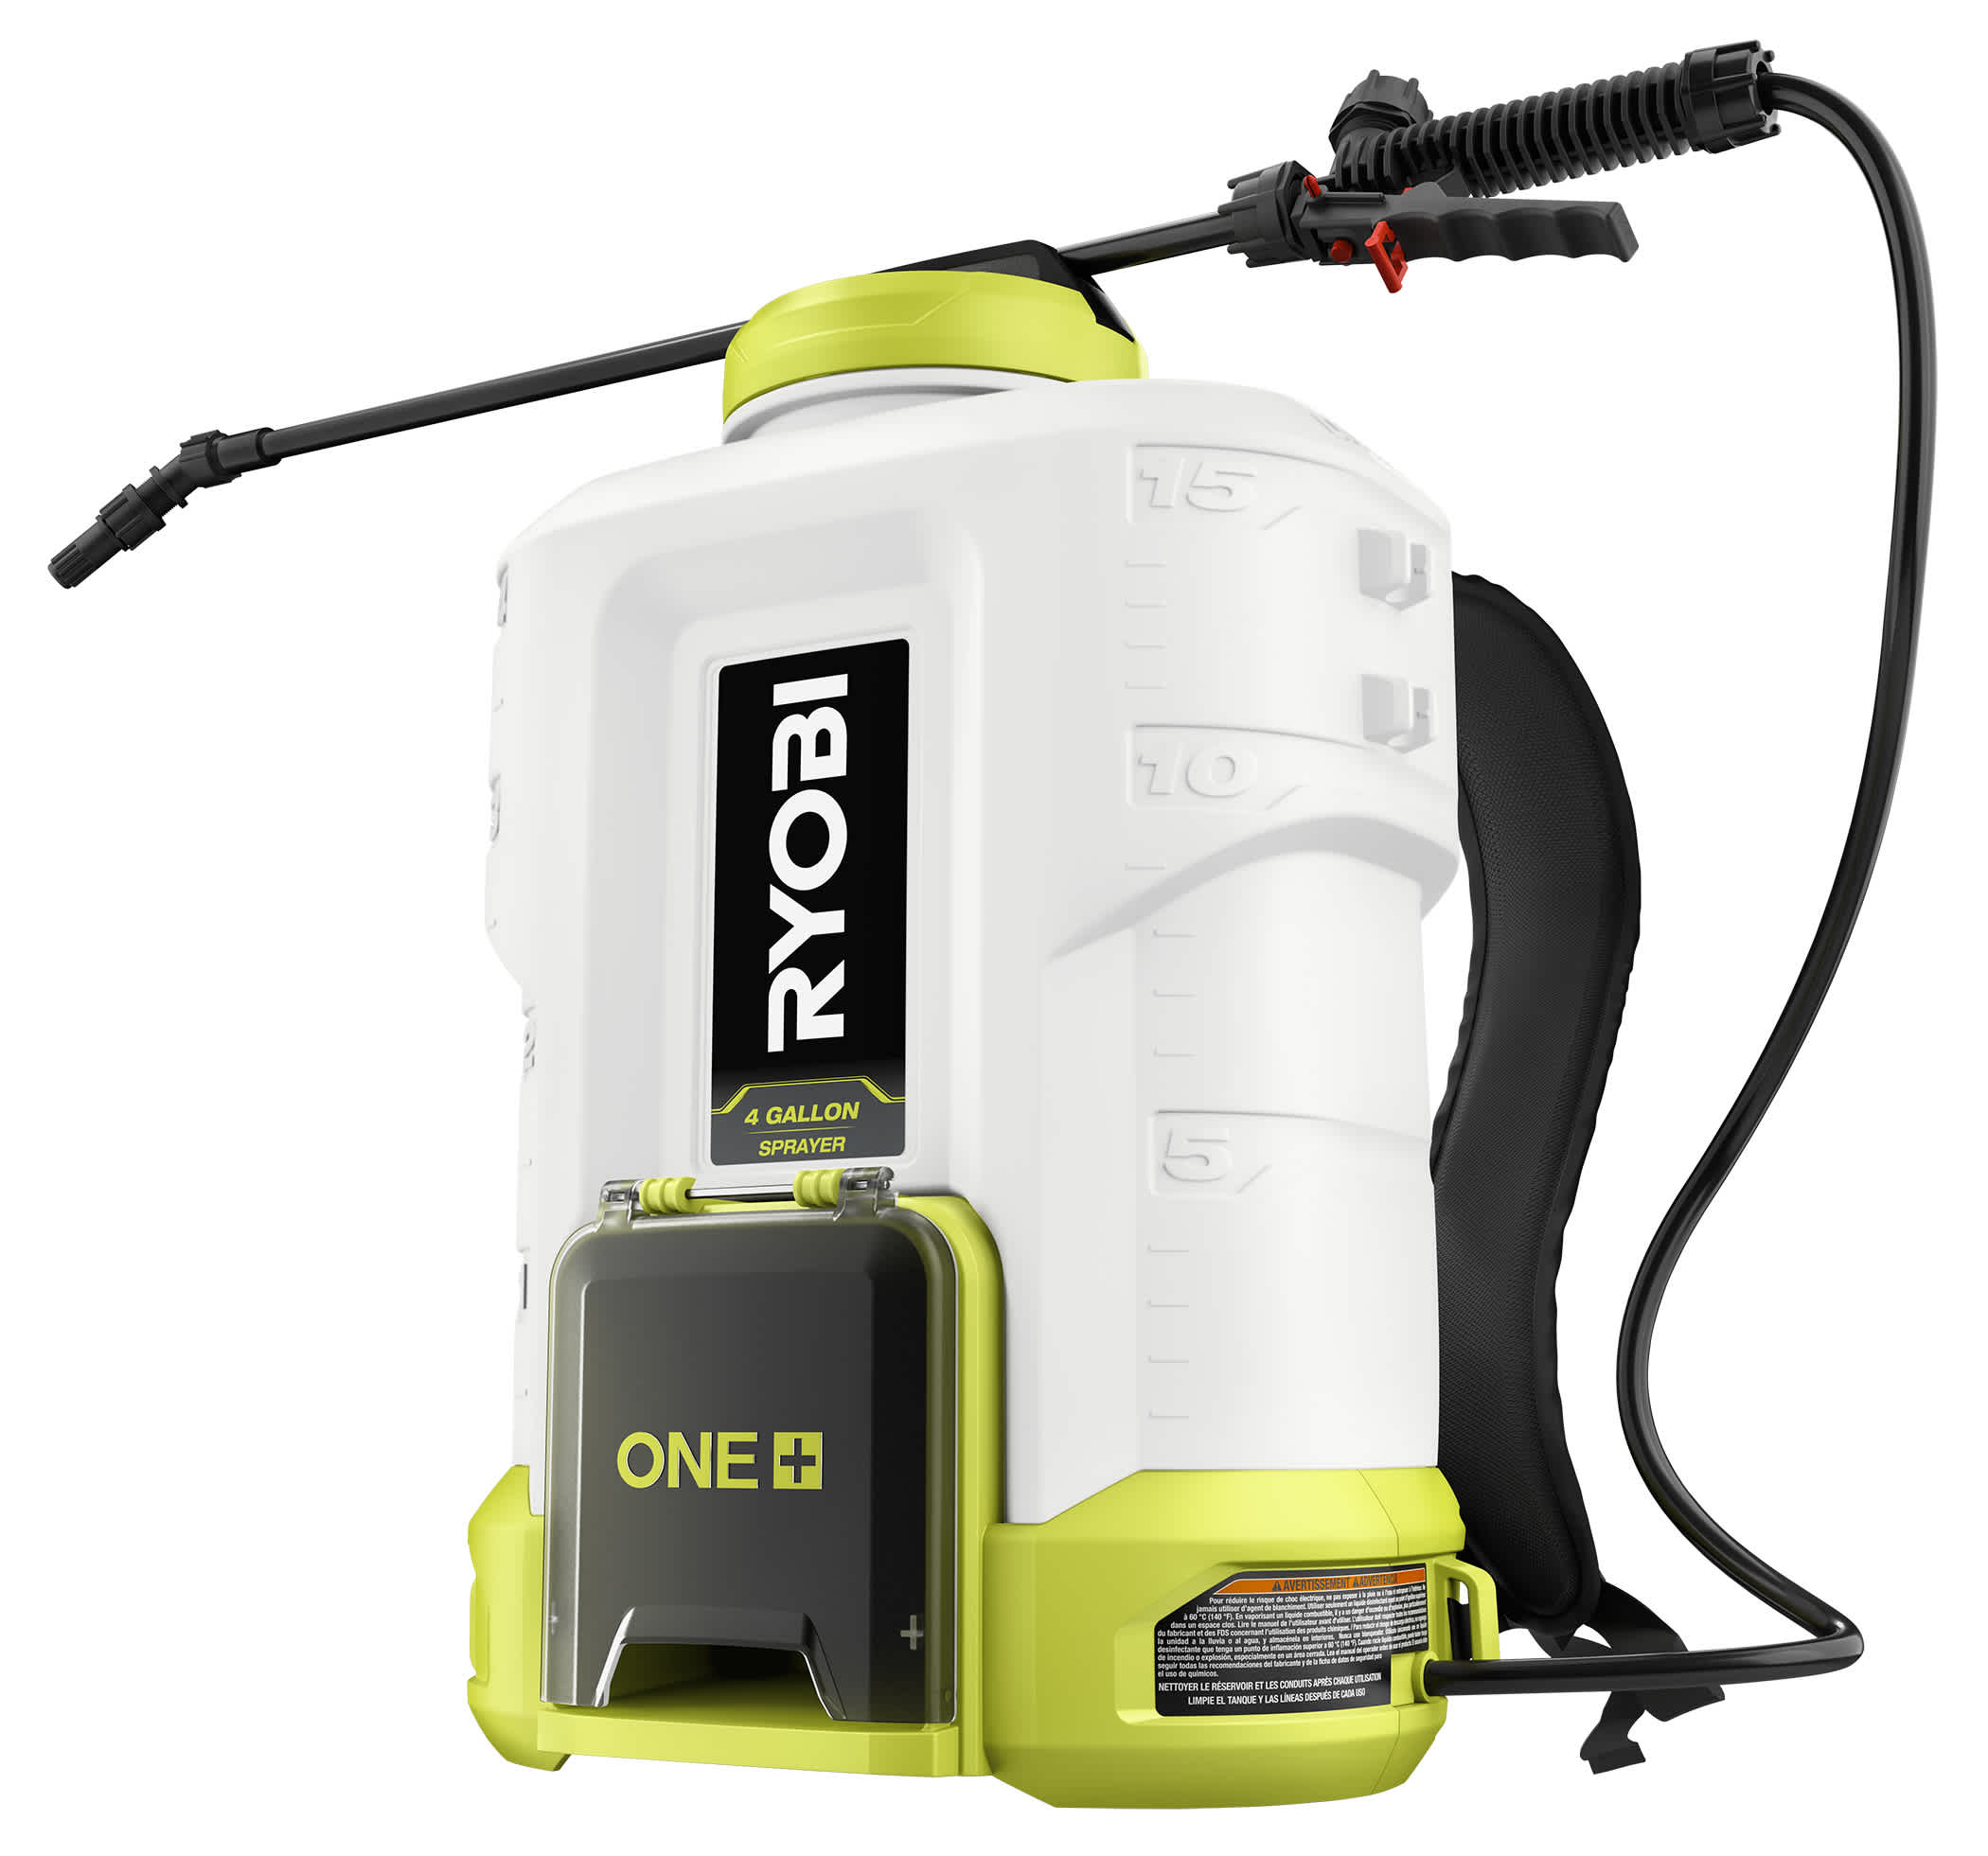 Feature Image for 18V ONE+ 4 GALLON BACKPACK CHEMICAL SPRAYER (TOOL ONLY).